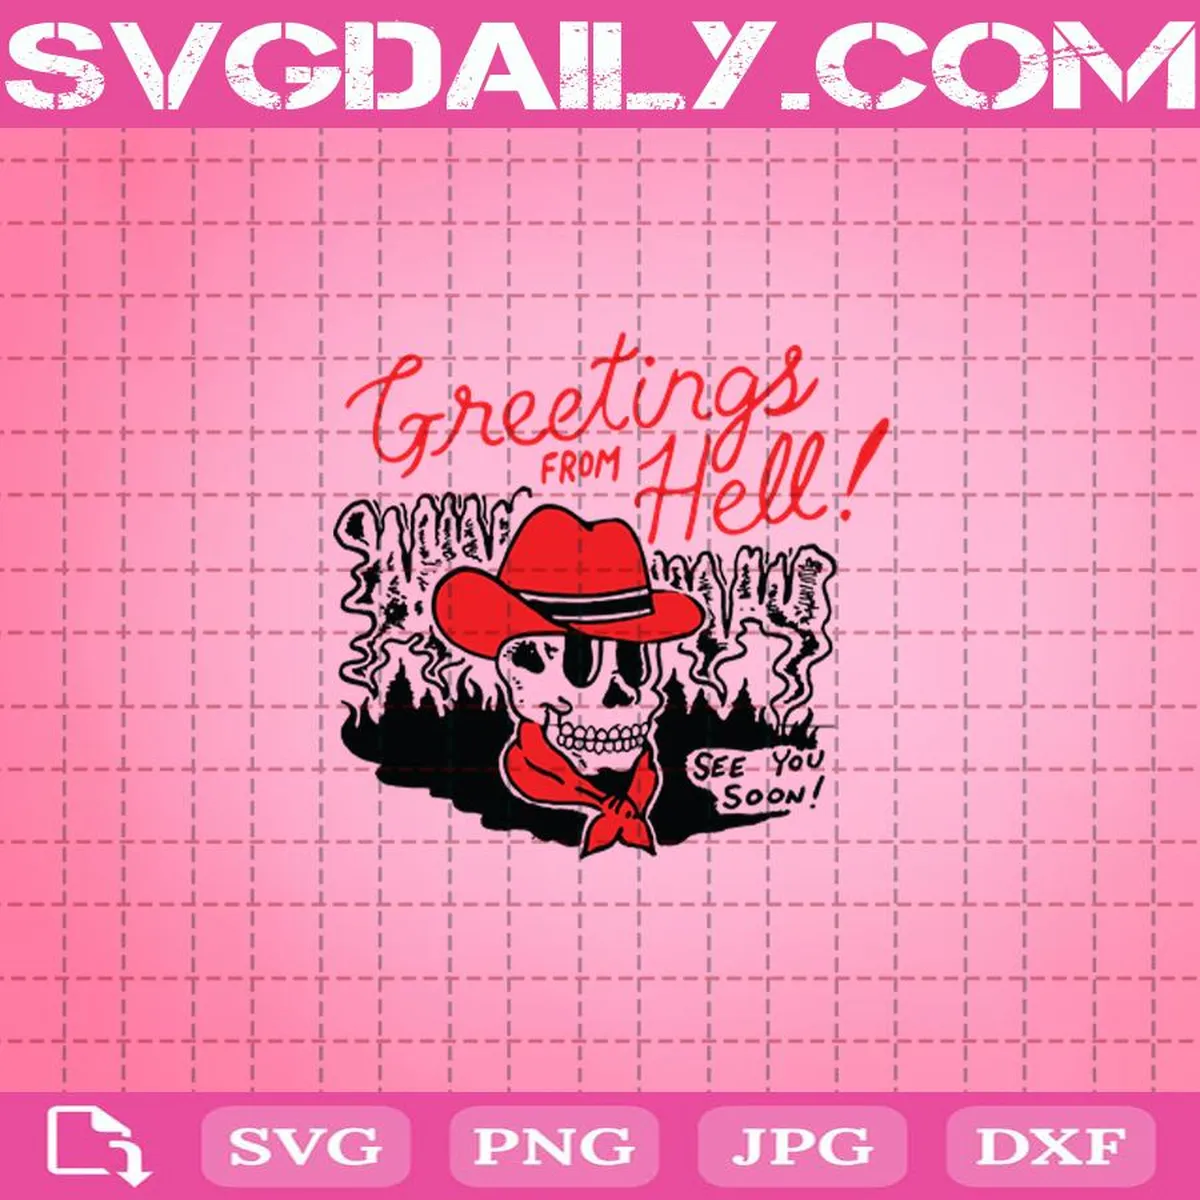 Halloween Skull Greetings Svg, Greetings From Hell Svg, Skull Svg, See You Soon Svg, Svg Png Dxf Eps Download Files